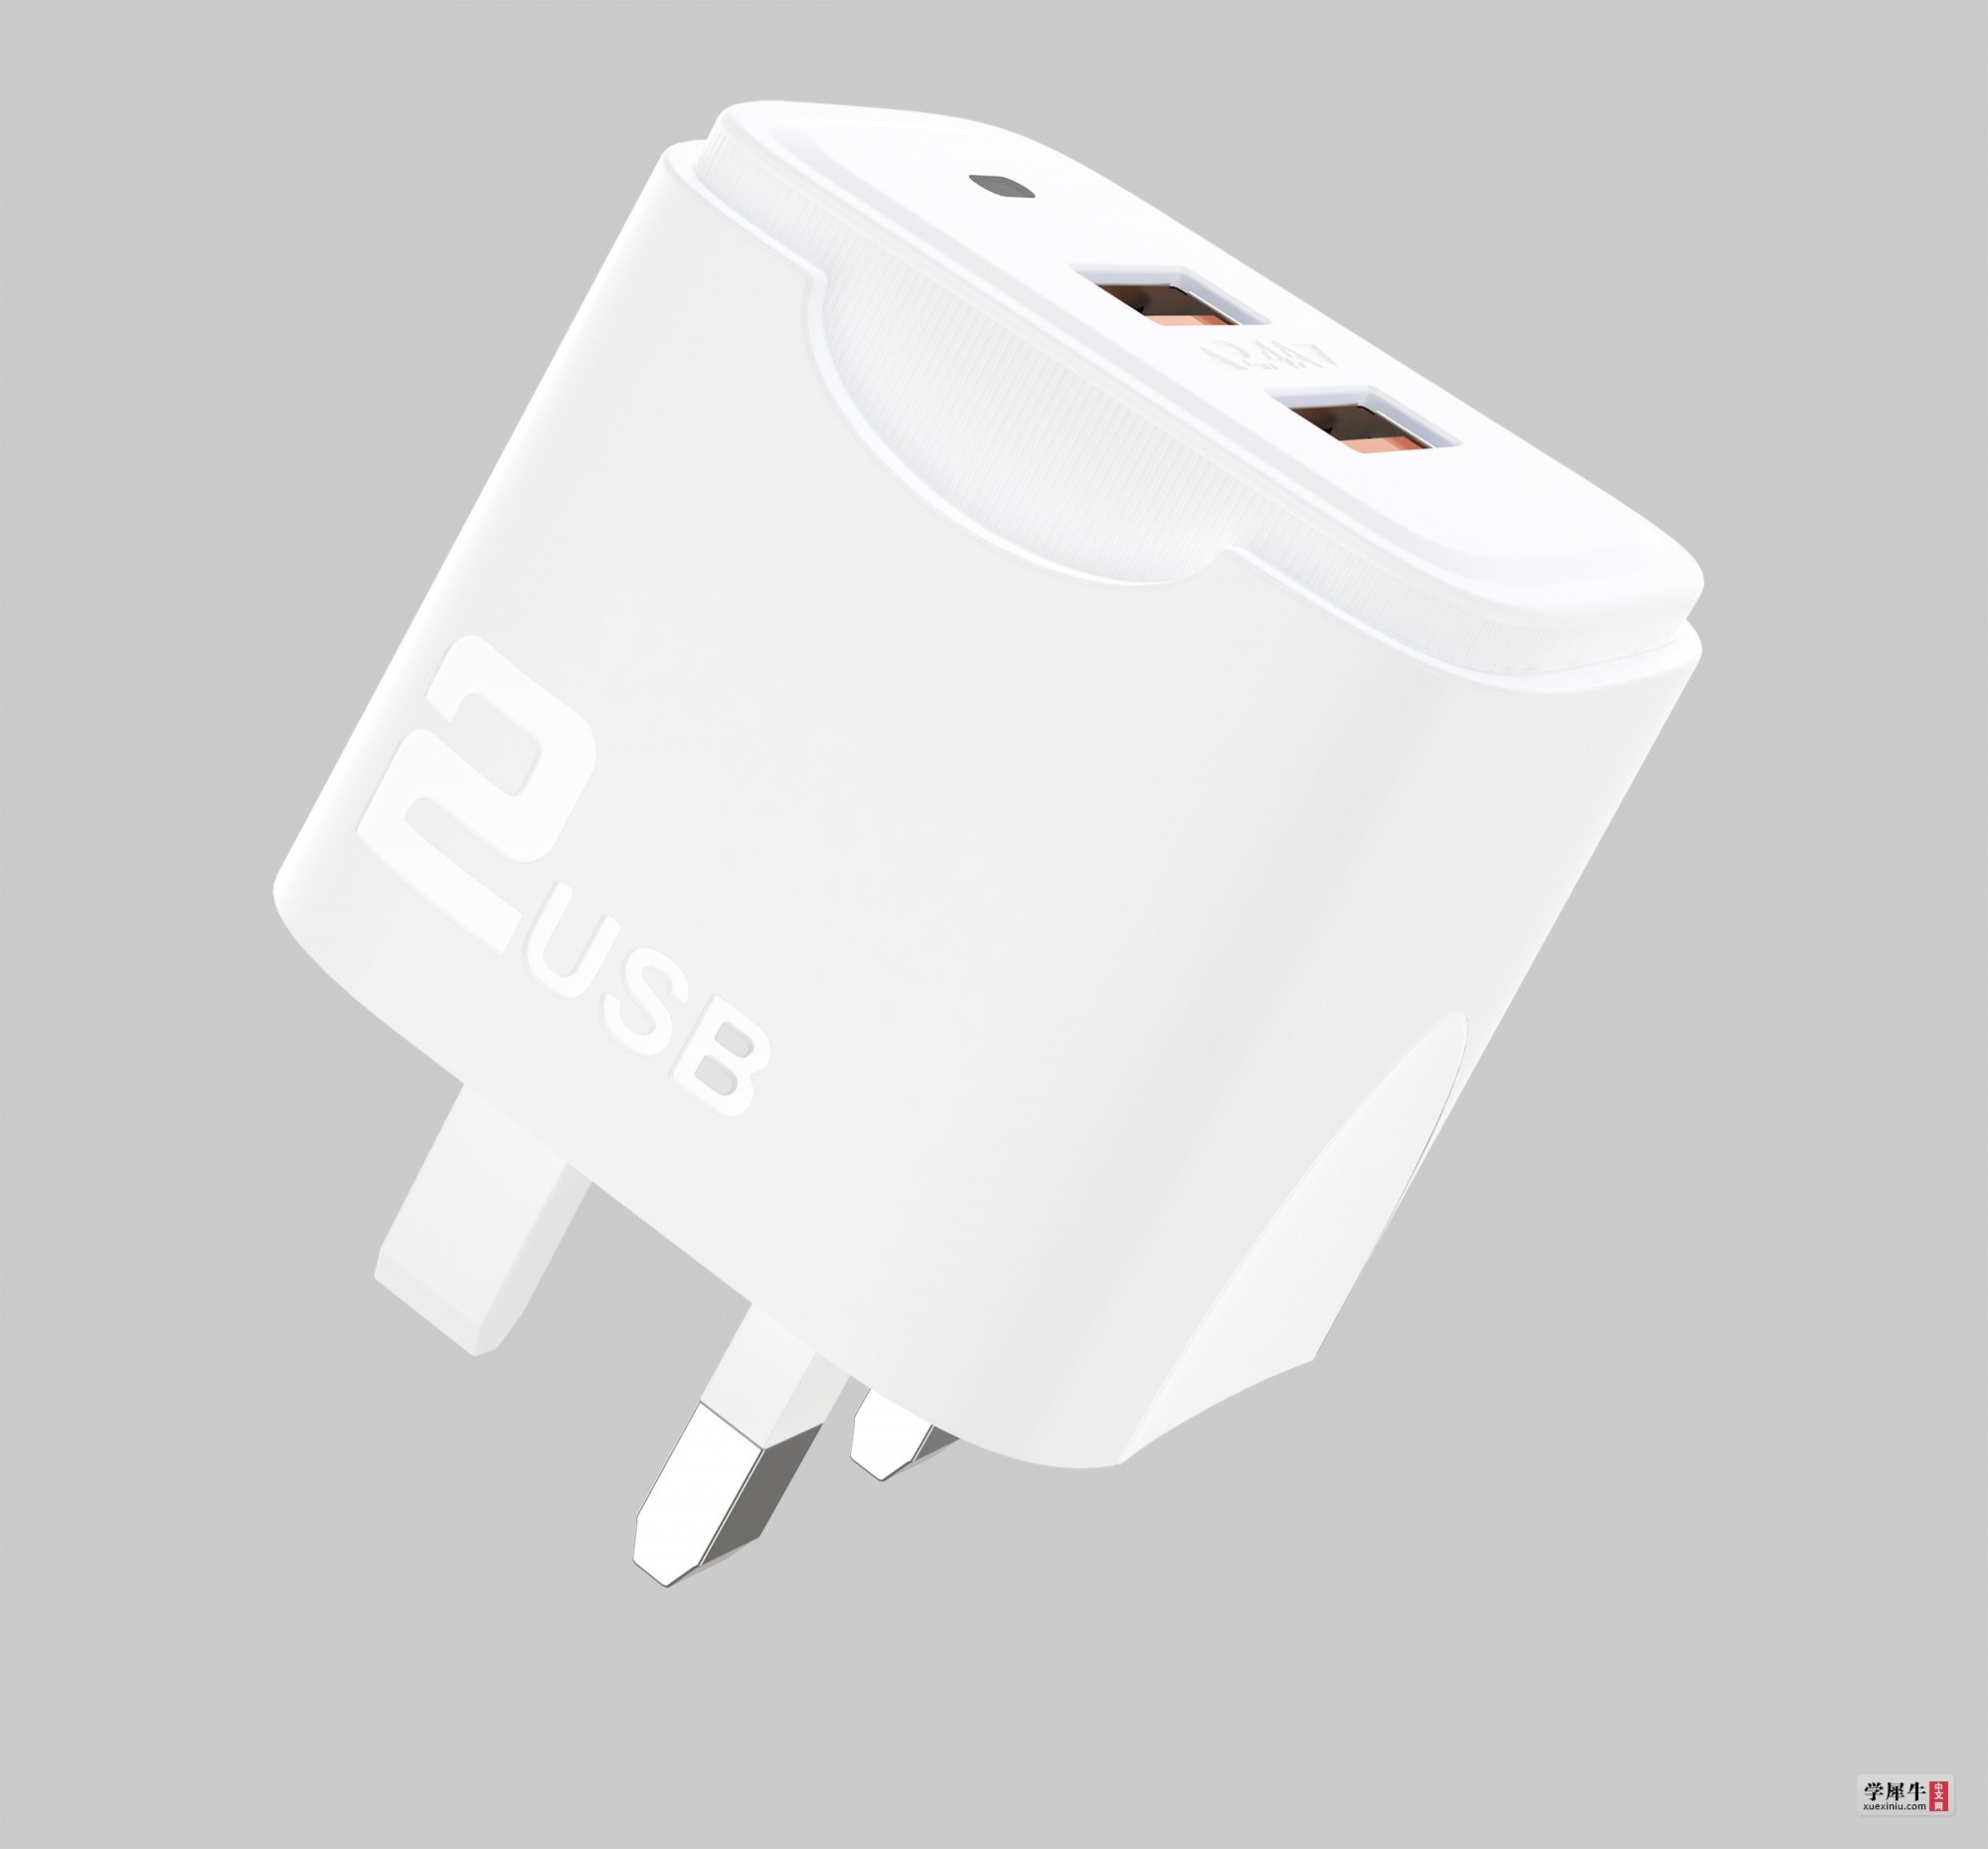 PIN JUE CHARGER 2019-11-05.932009 拷贝.jpg